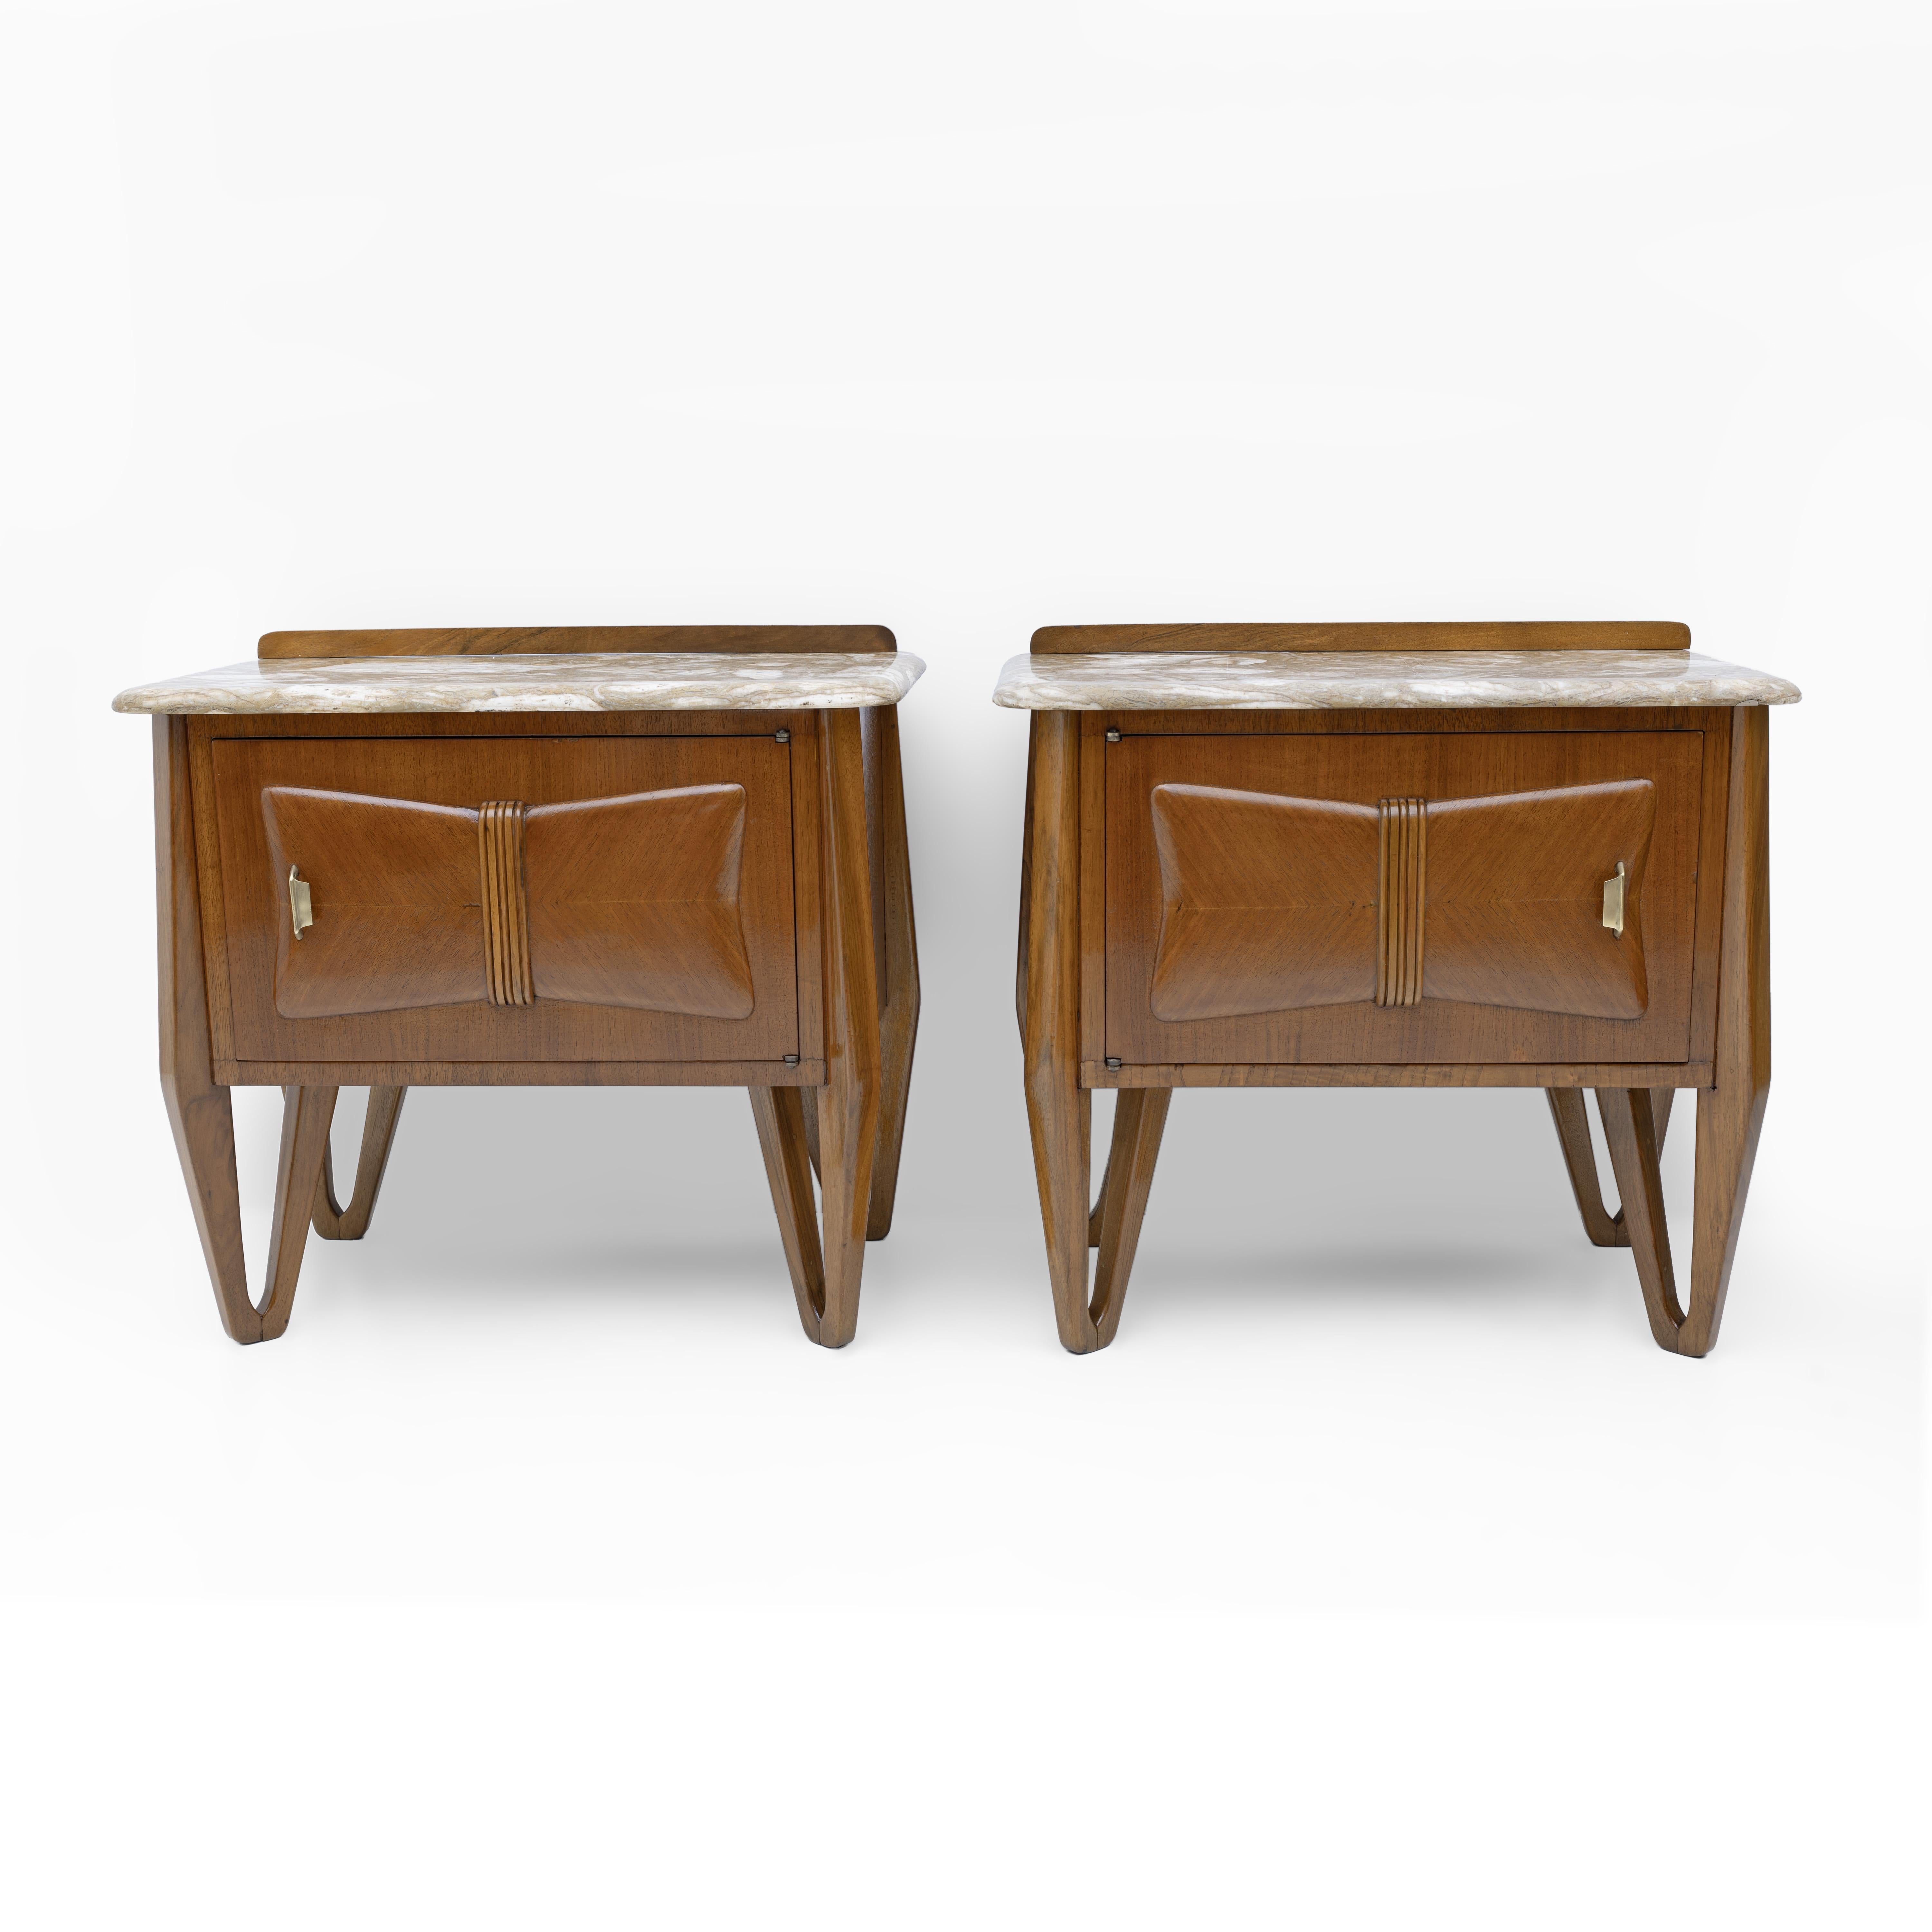 Pair of Mid-Century Modern Italian Walnut and Marble Nightstands, 1950s For Sale 4